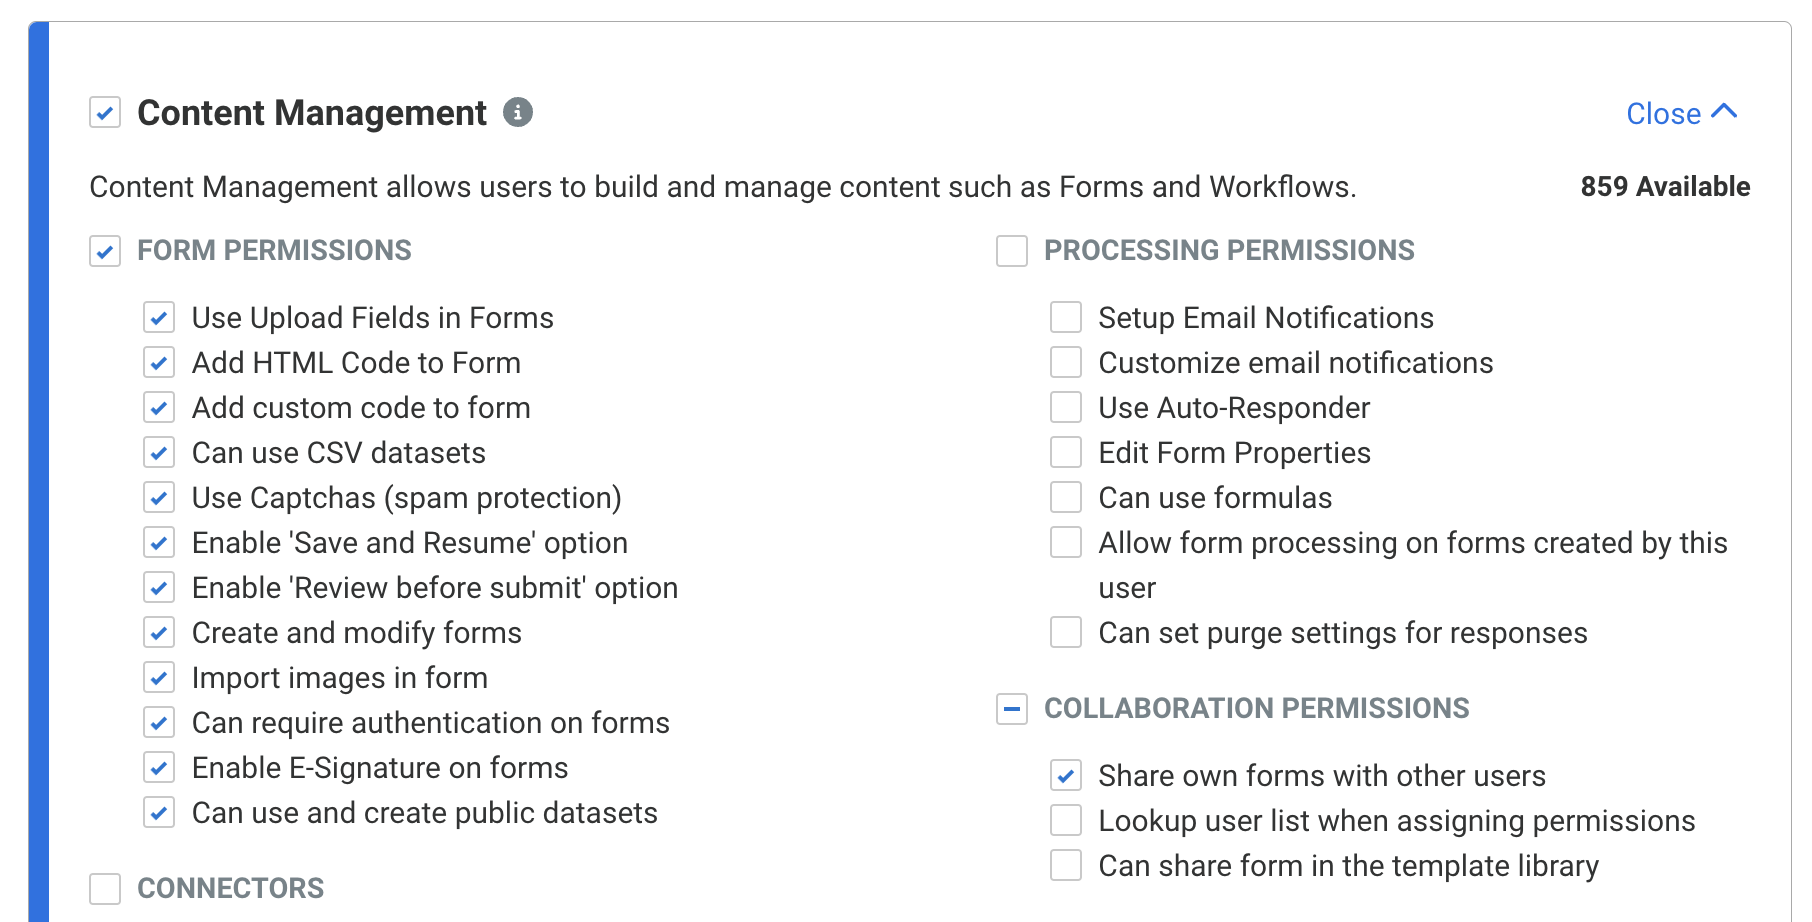 View when configuring/editing permissions